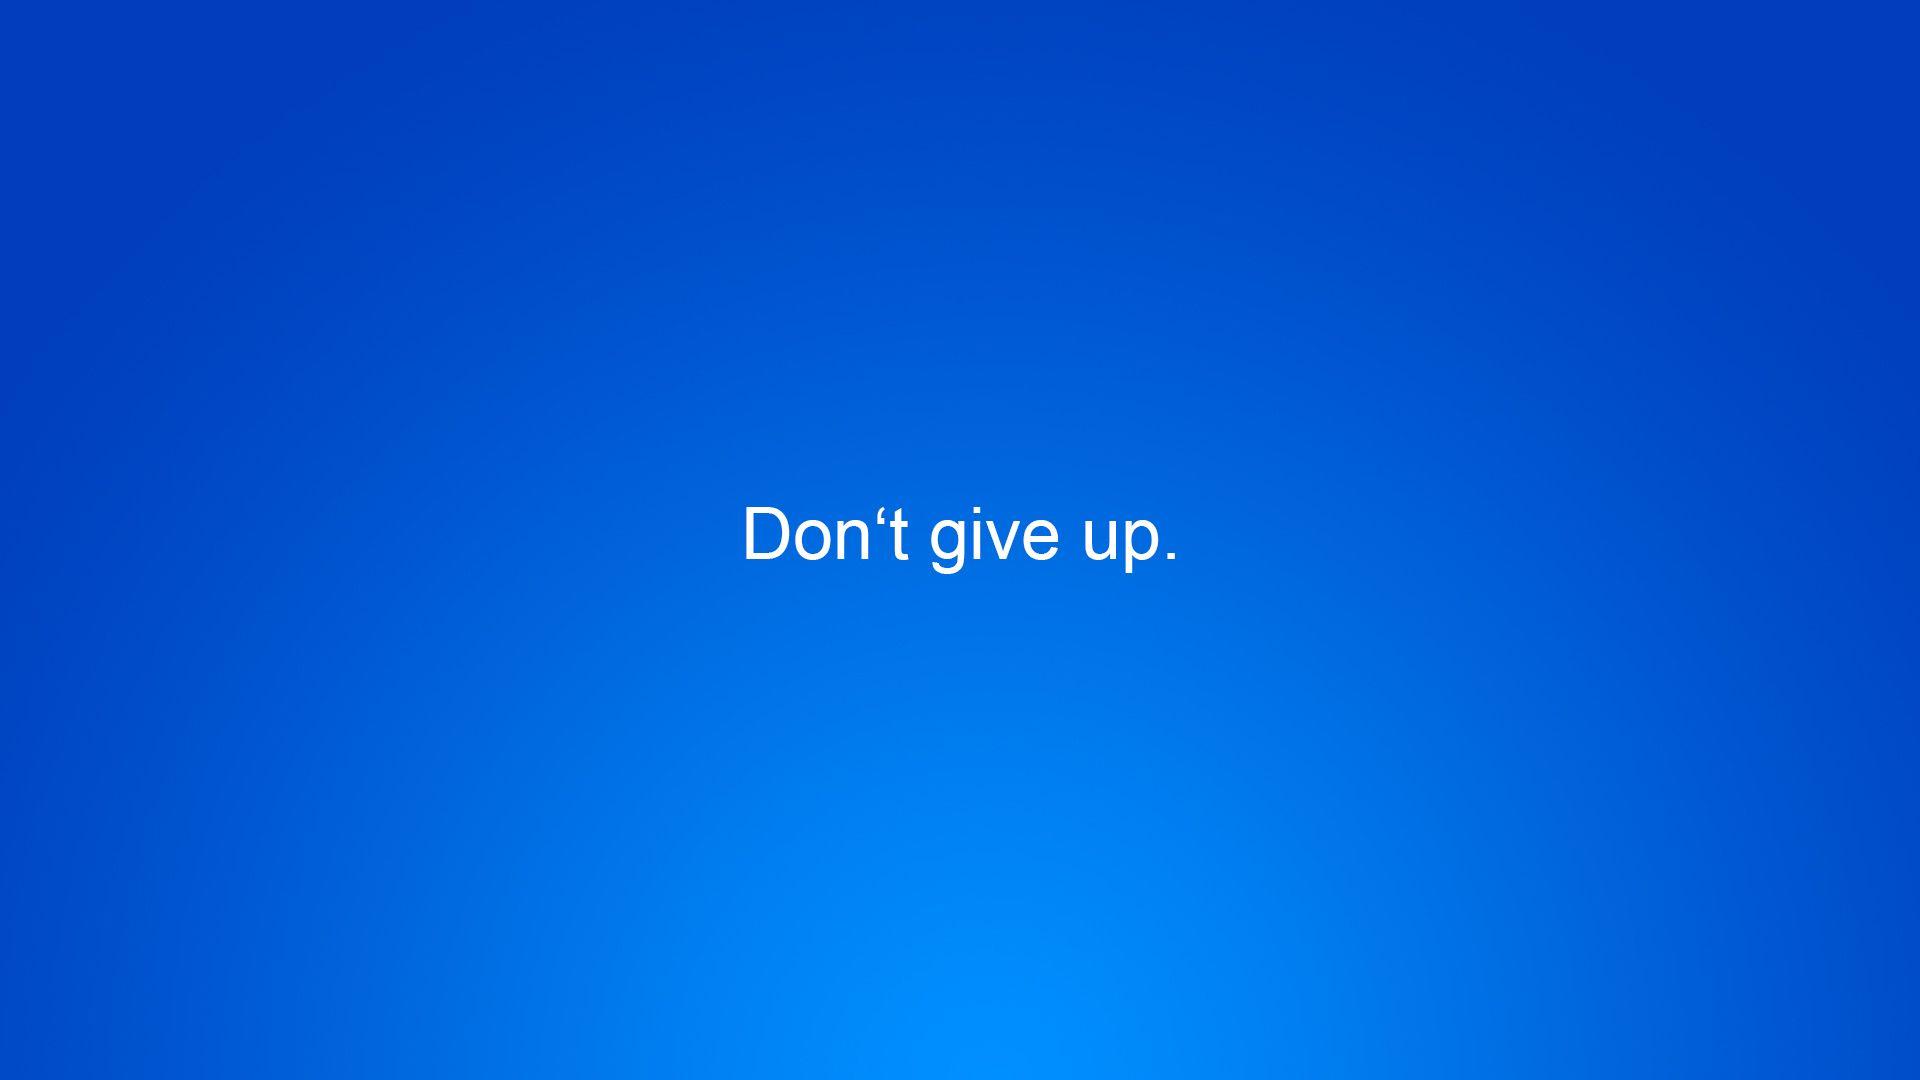 This is a wallpaper I made for myself during tough times as a